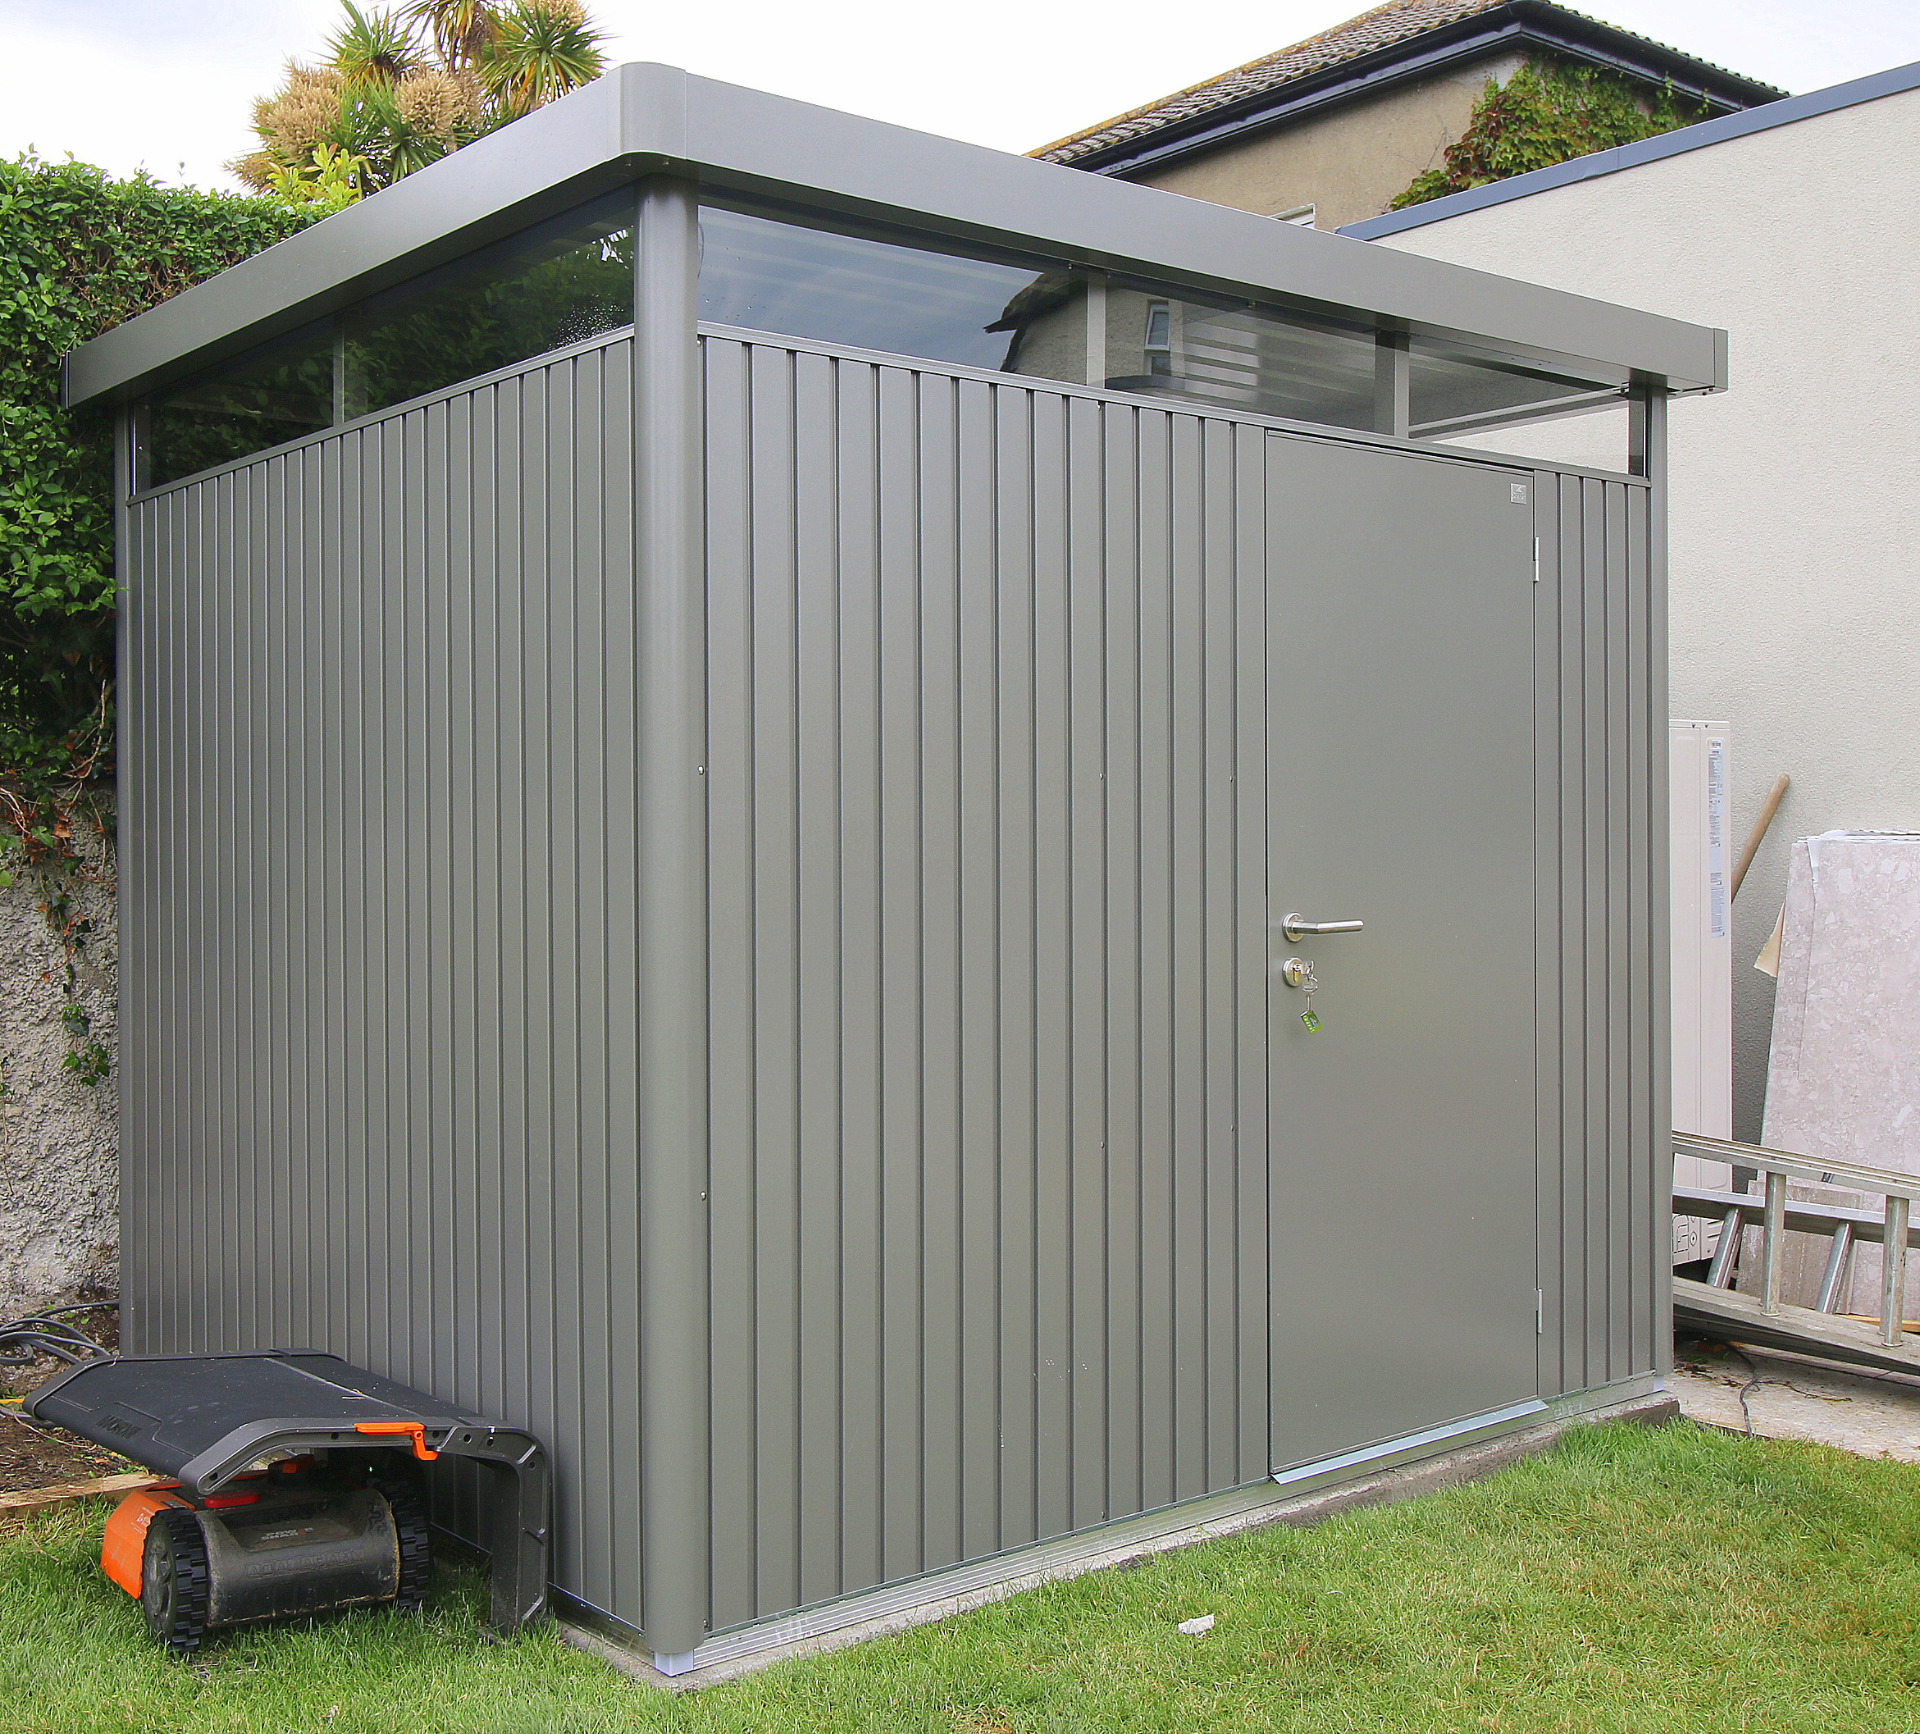 Biohort HighLine Steel Garden Sheds | The stylish & secure way to store your garden items